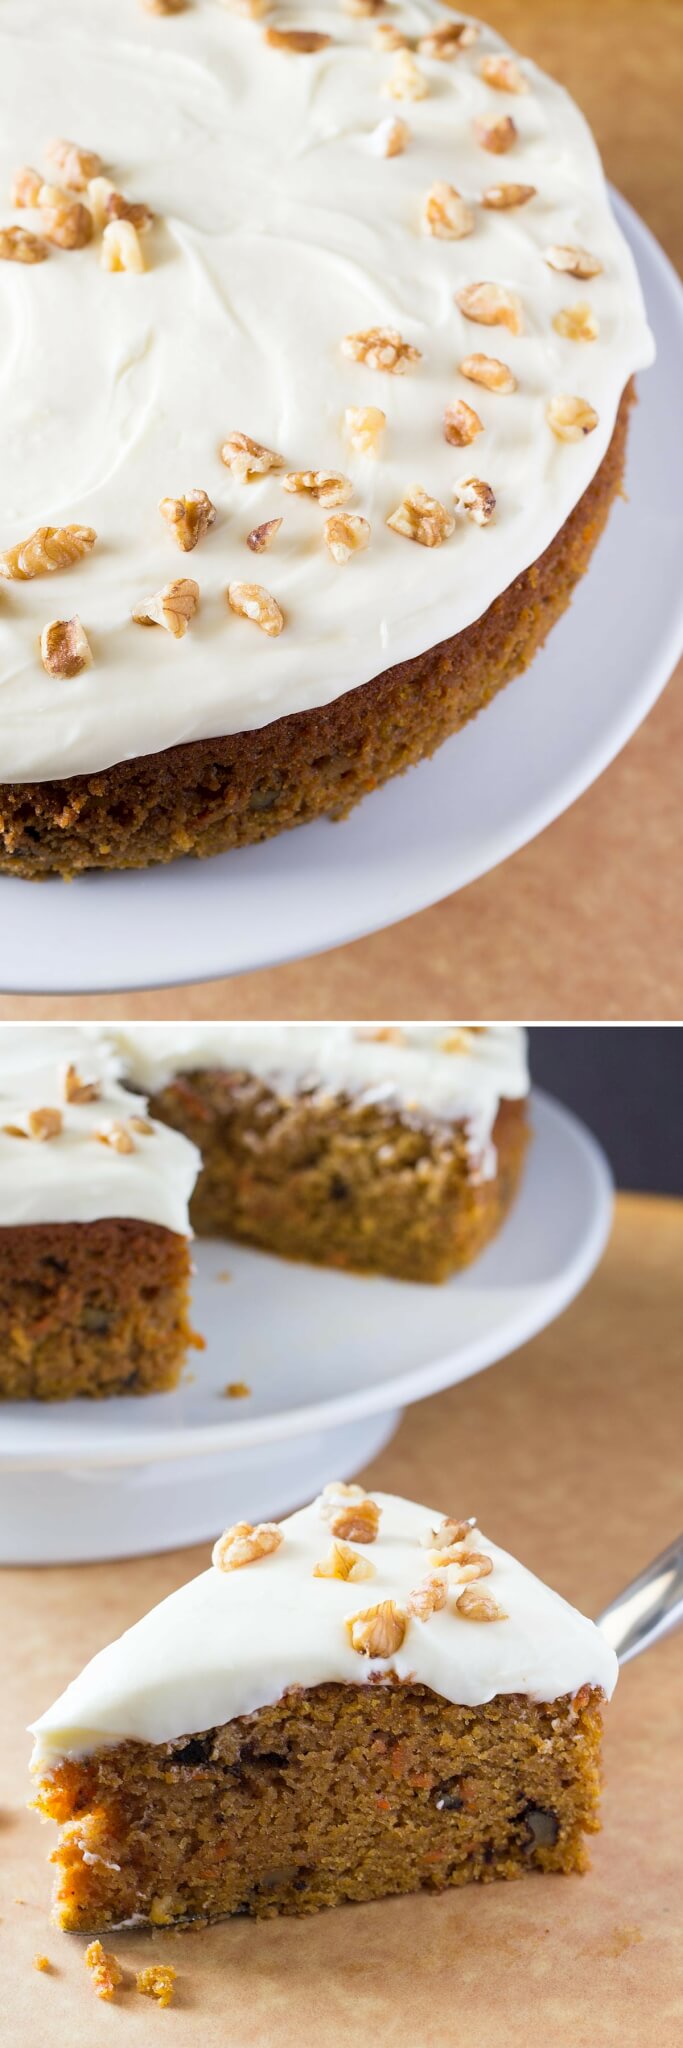 The BEST carrot cake I've ever had. So moist, filled with spices, slathered with smooth & tangy cream cheese frosting, and just plain delicious.